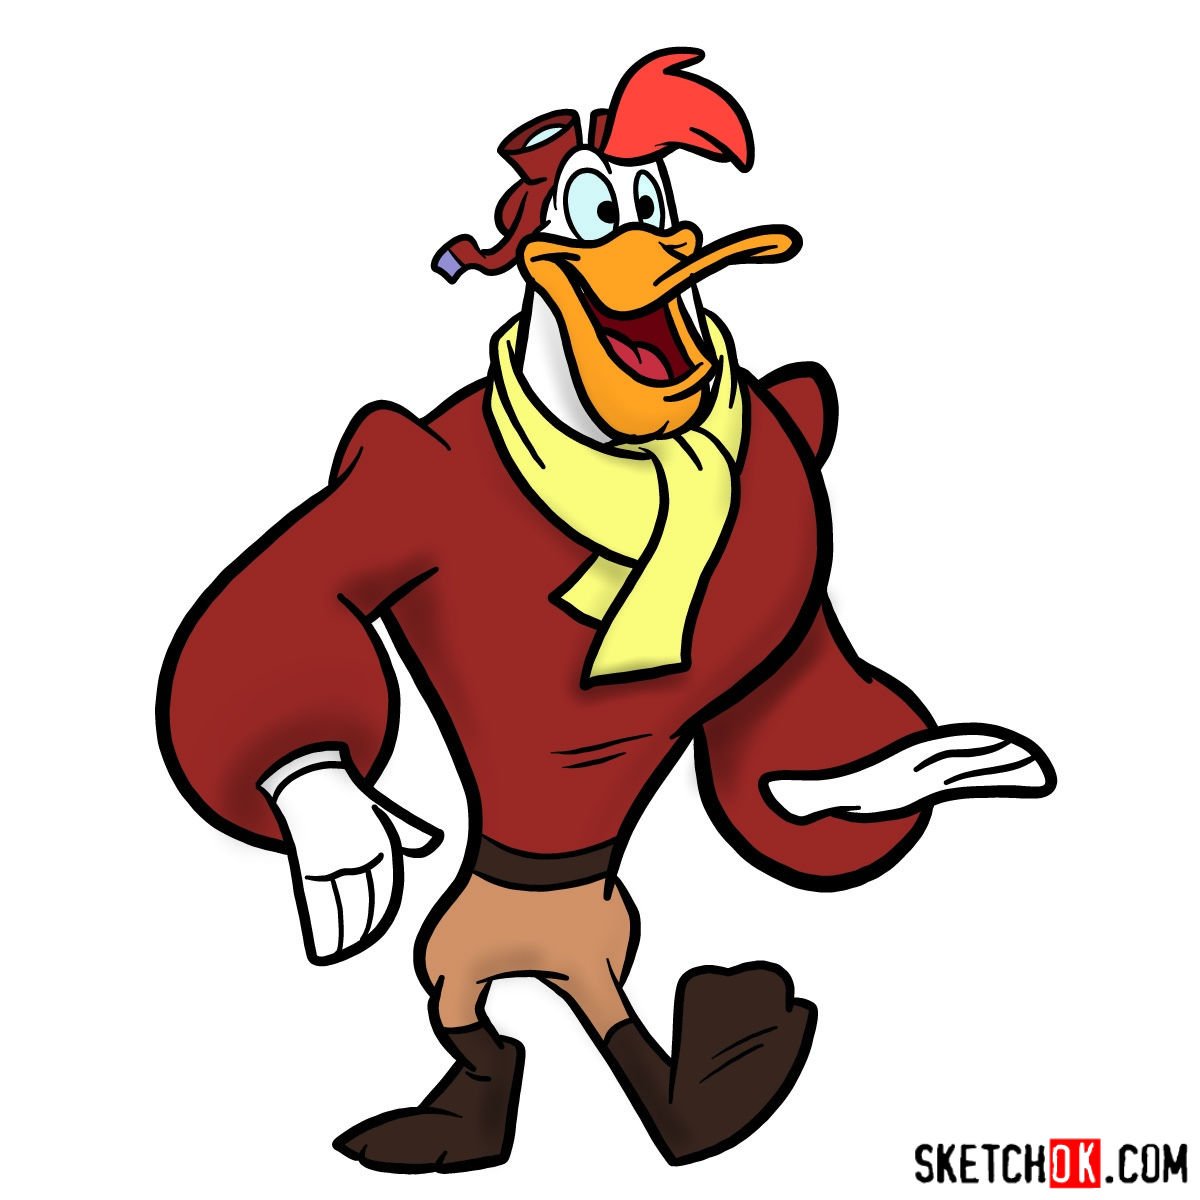 How to draw Launchpad McQuack